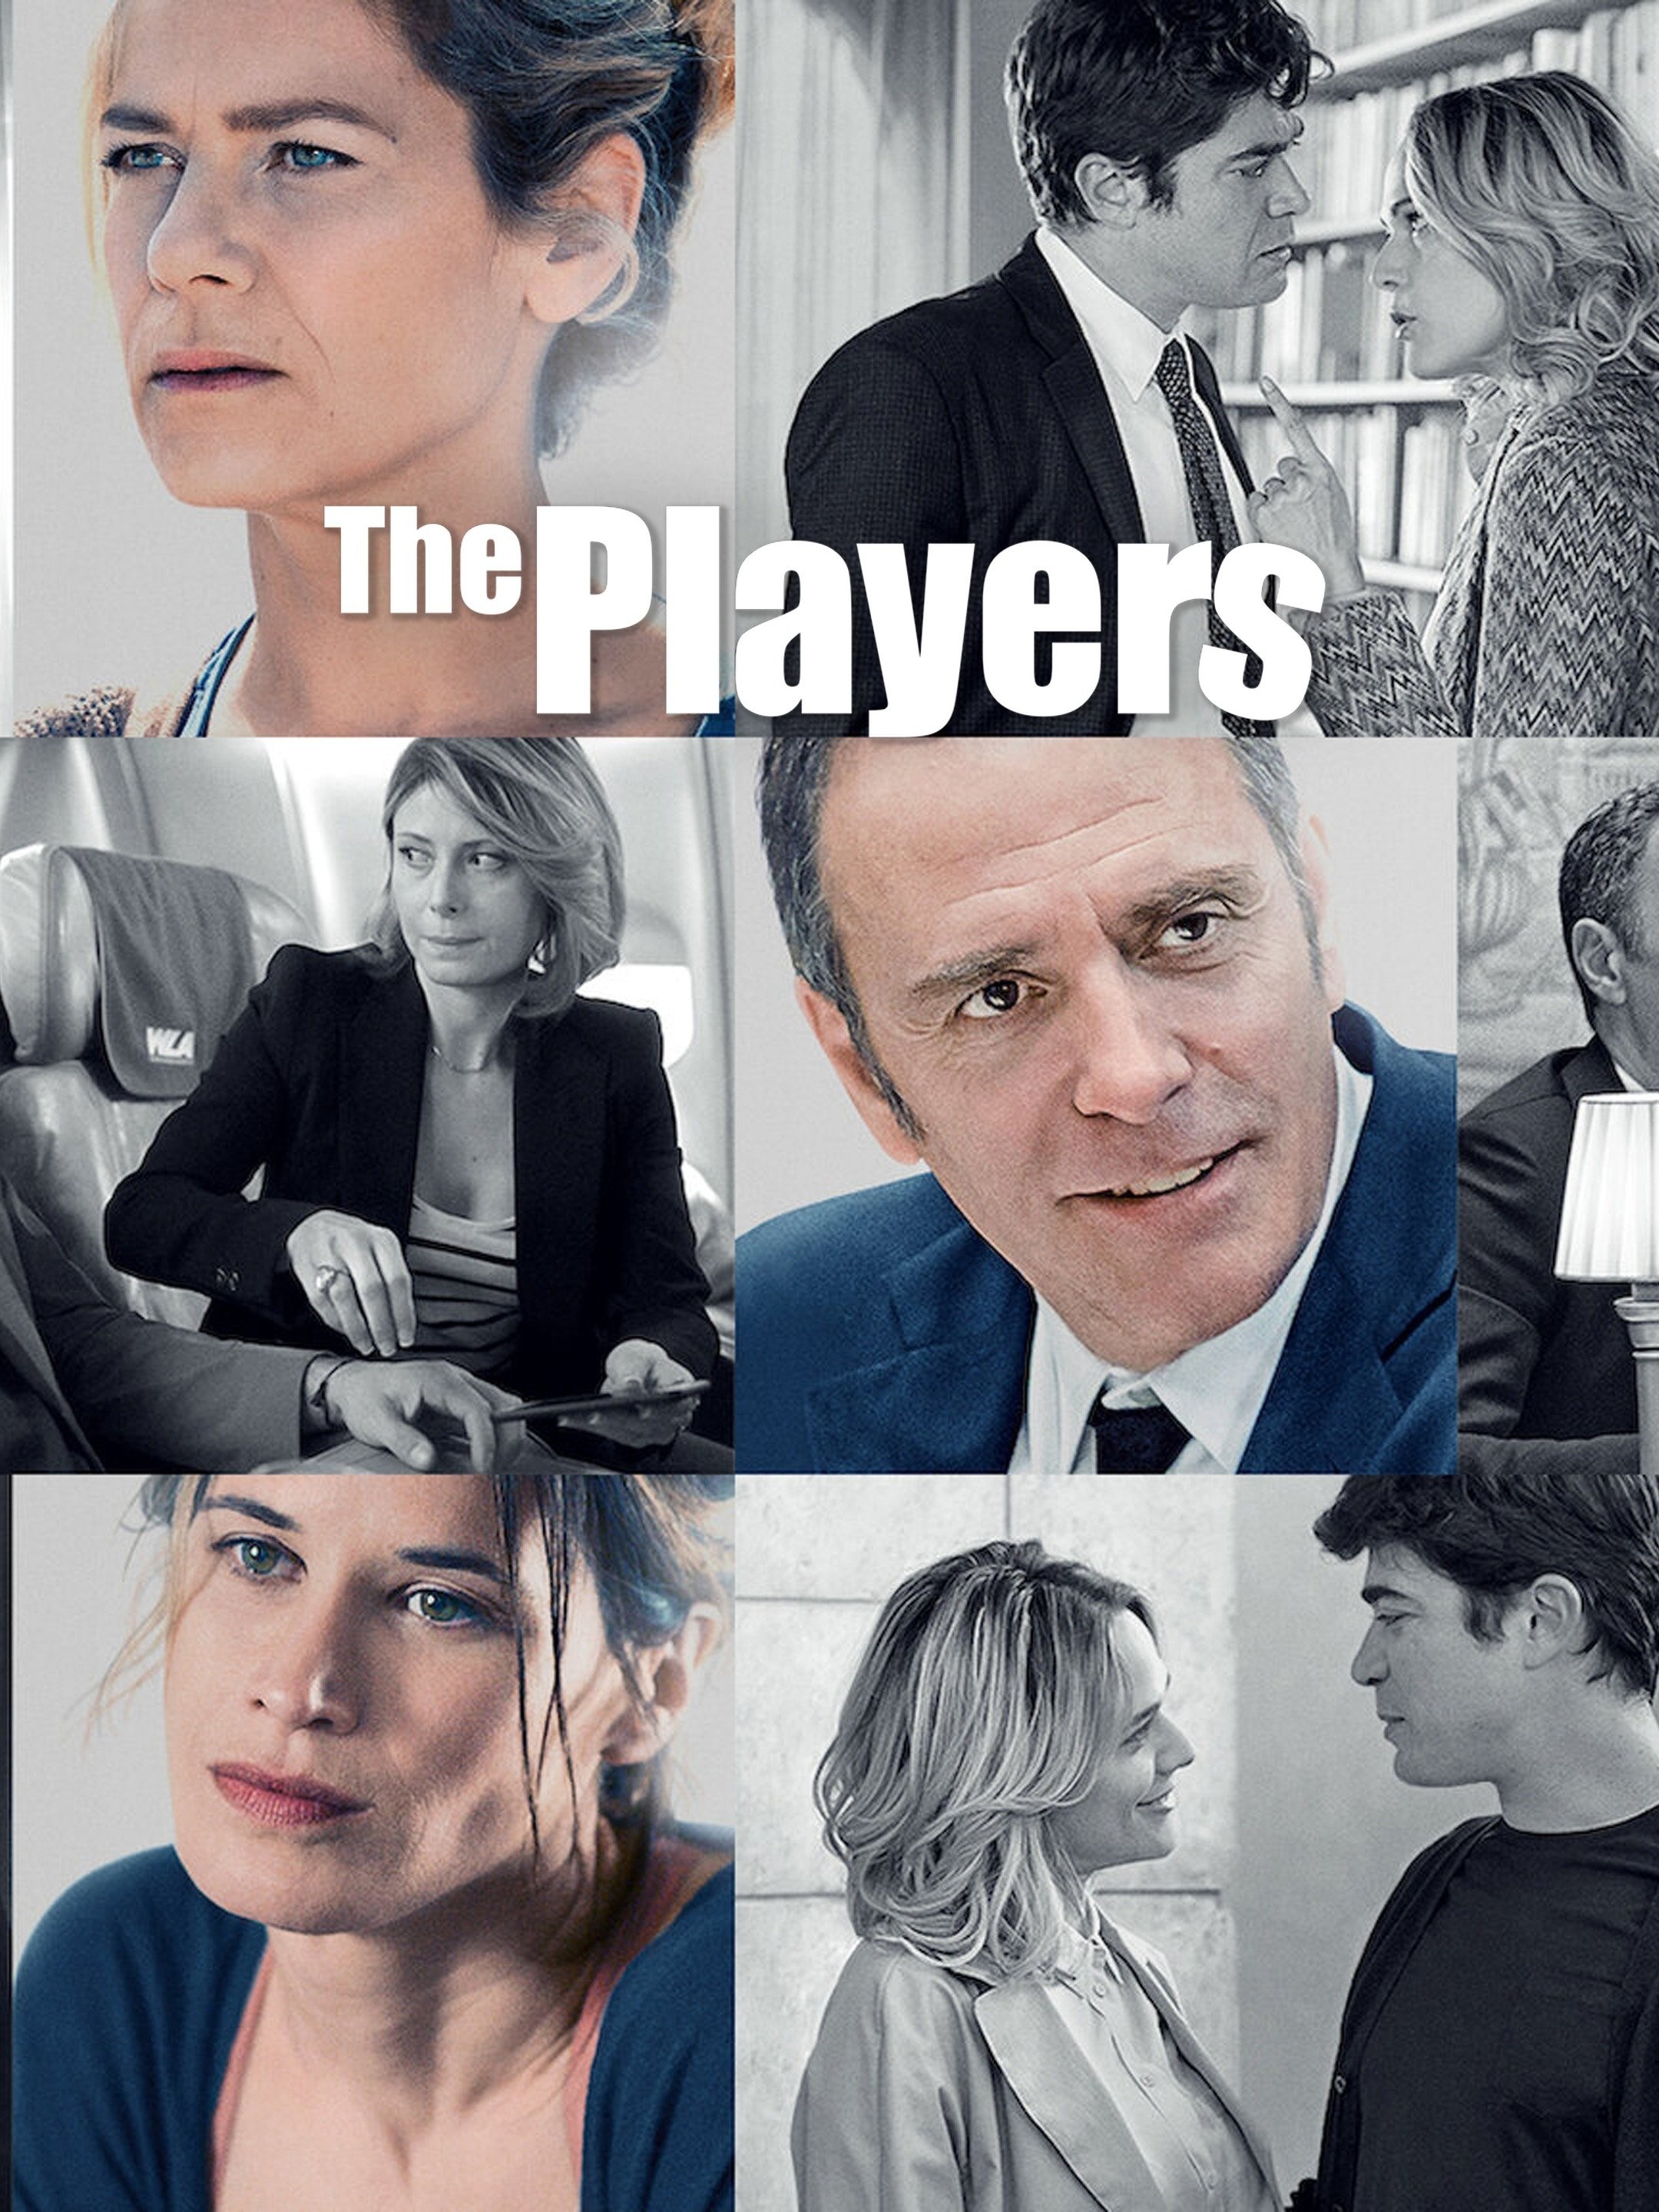 The Players Movie Netflix: Review, Release Date, Cast, Trailer, Story